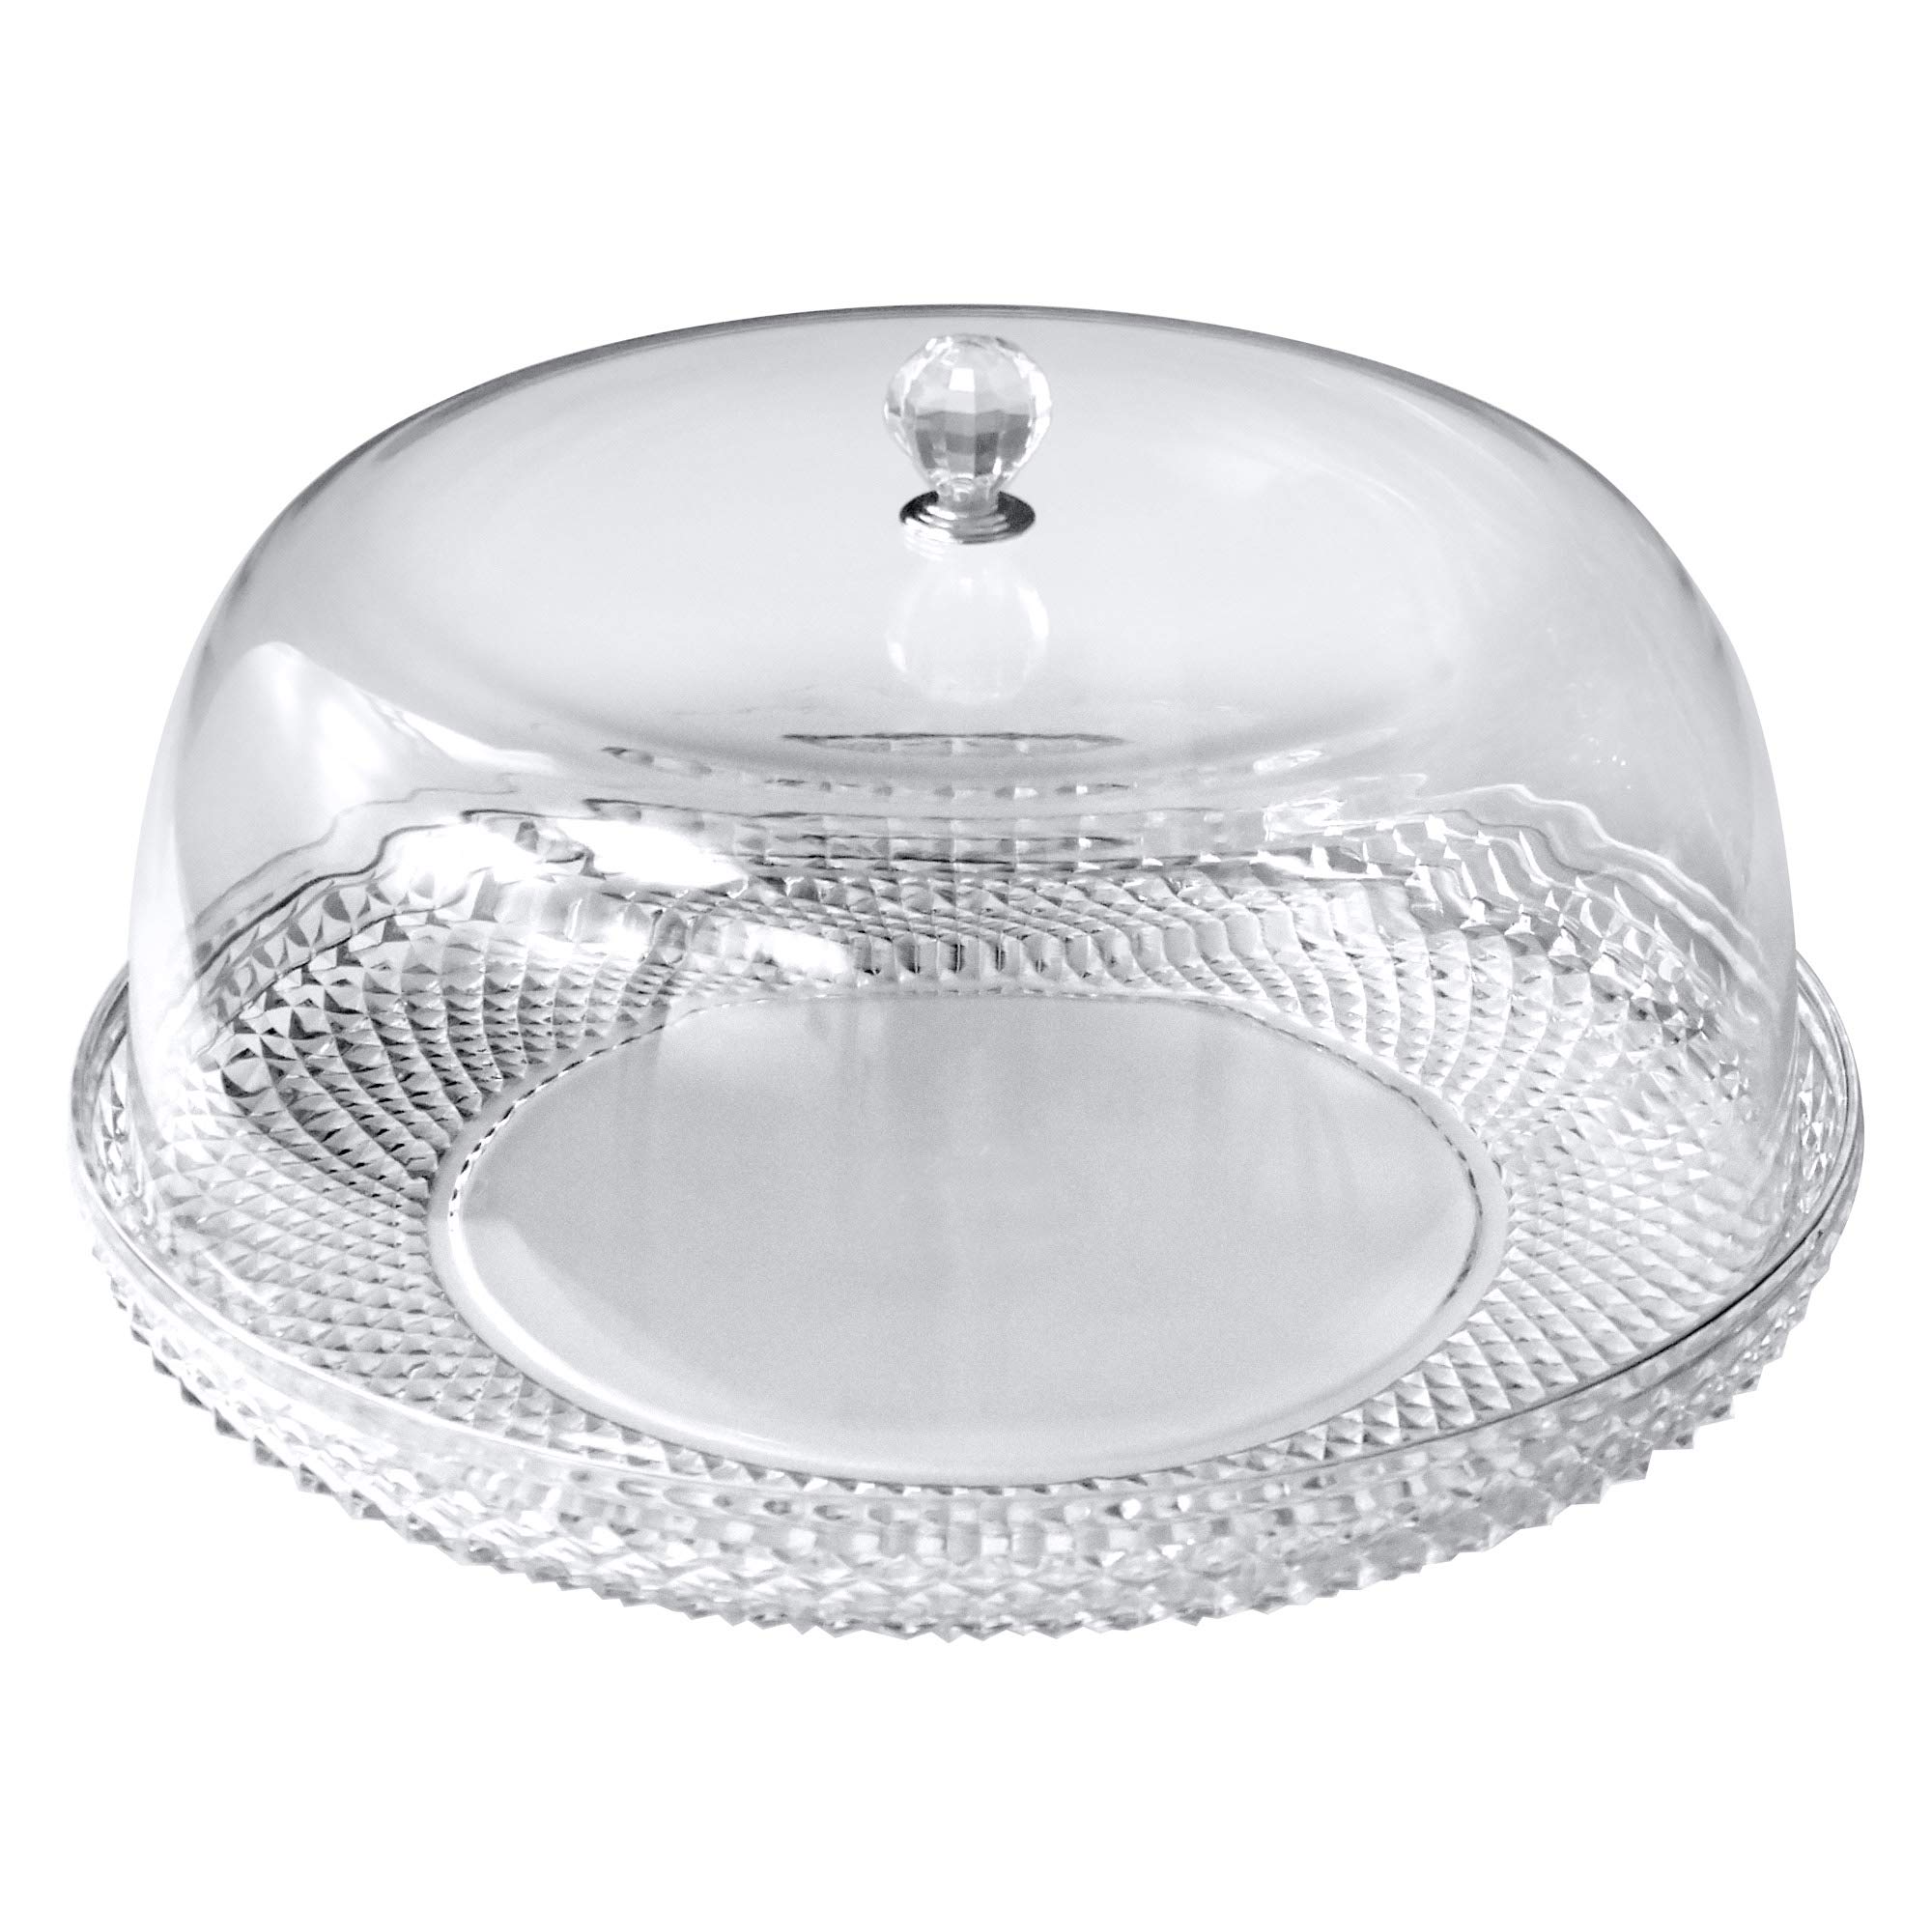 Amazing Abby - Kate - 12-Inch Acrylic Cake Plate with Dome, Plastic Cake Stand with Cover, Serving Platter with Lid, BPA-Free and Shatter-Proof, Perfect for Display, Party, Entertaining, and More